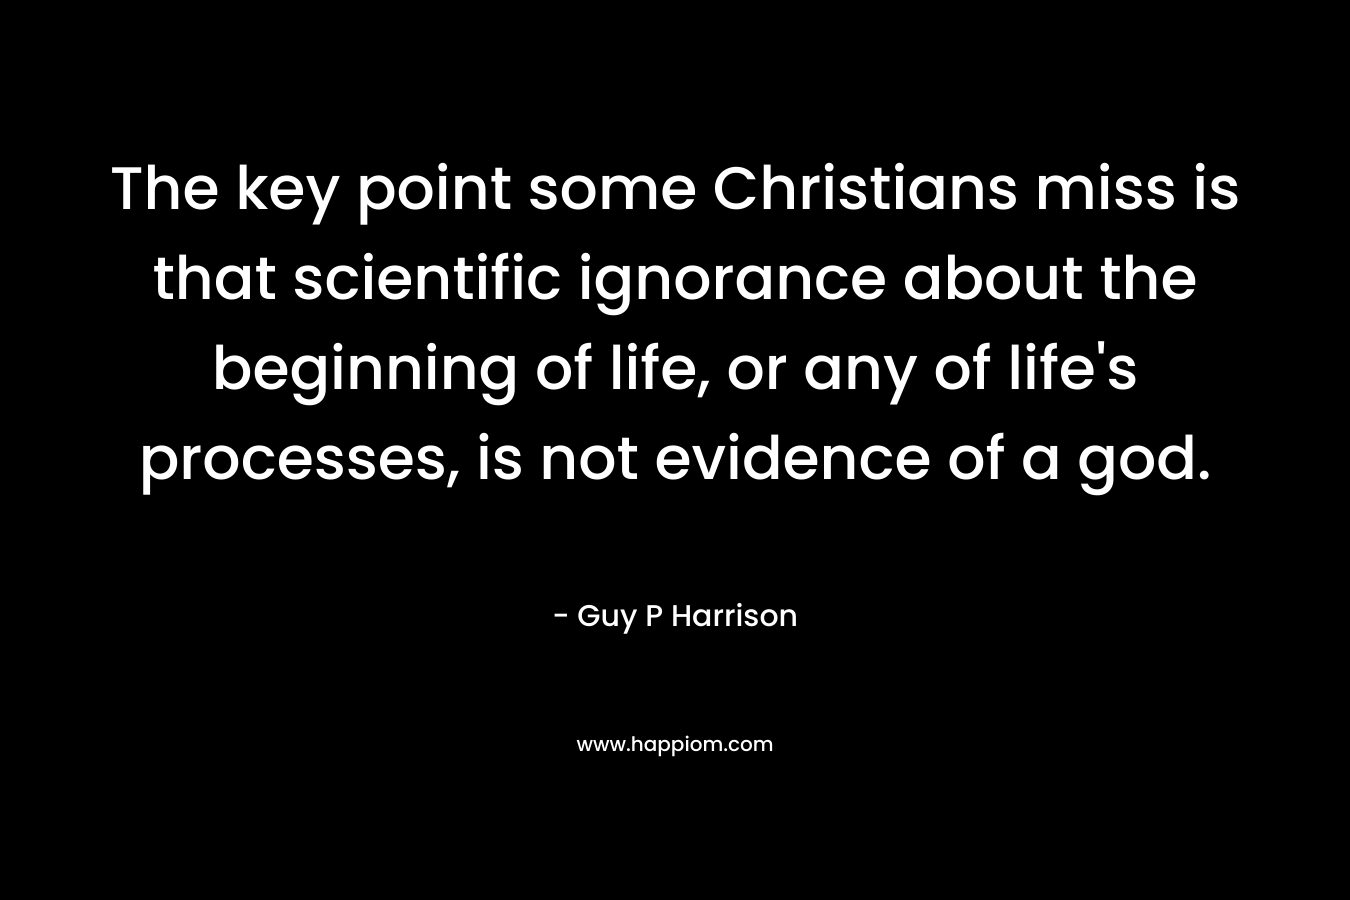 The key point some Christians miss is that scientific ignorance about the beginning of life, or any of life’s processes, is not evidence of a god. – Guy P Harrison